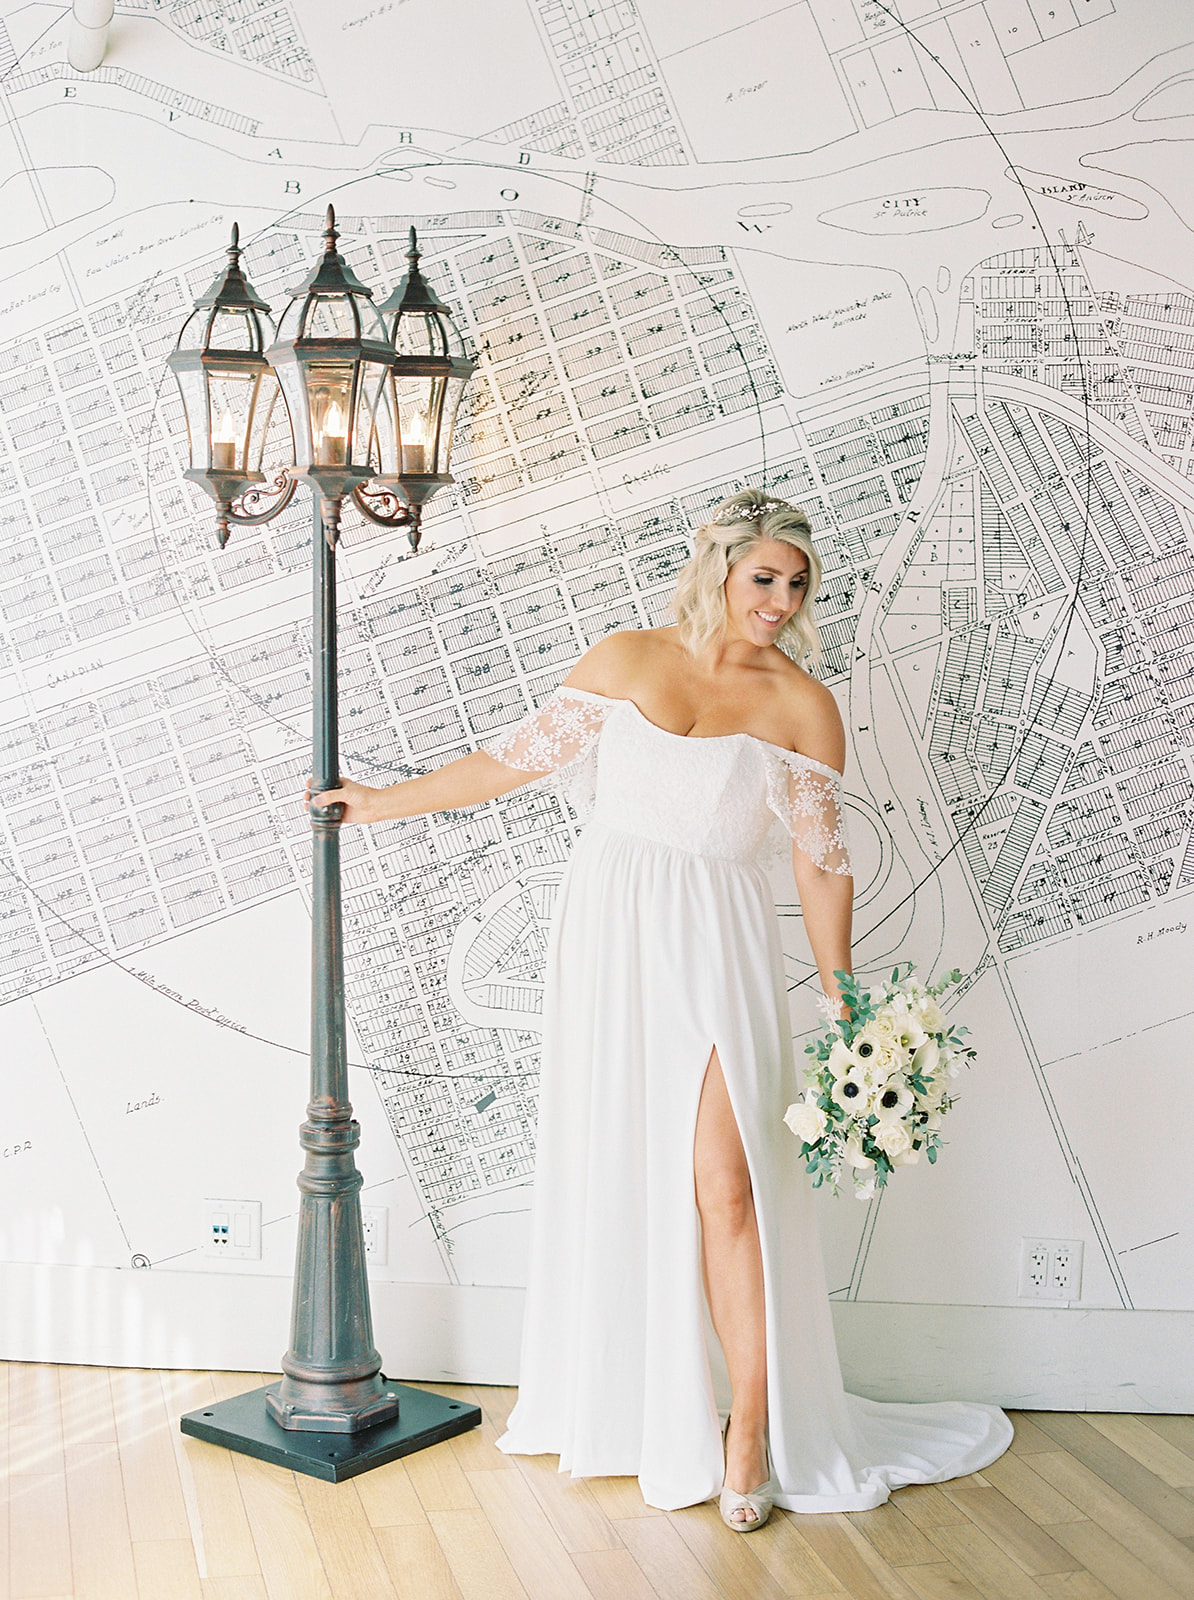 Craving a Paris Getaway? This Parisian Wedding Inspiration Will Transport You To a Quaint Town In France Featured by Brontë Bride, off the shoulder wedding dress, anemone bouquet 